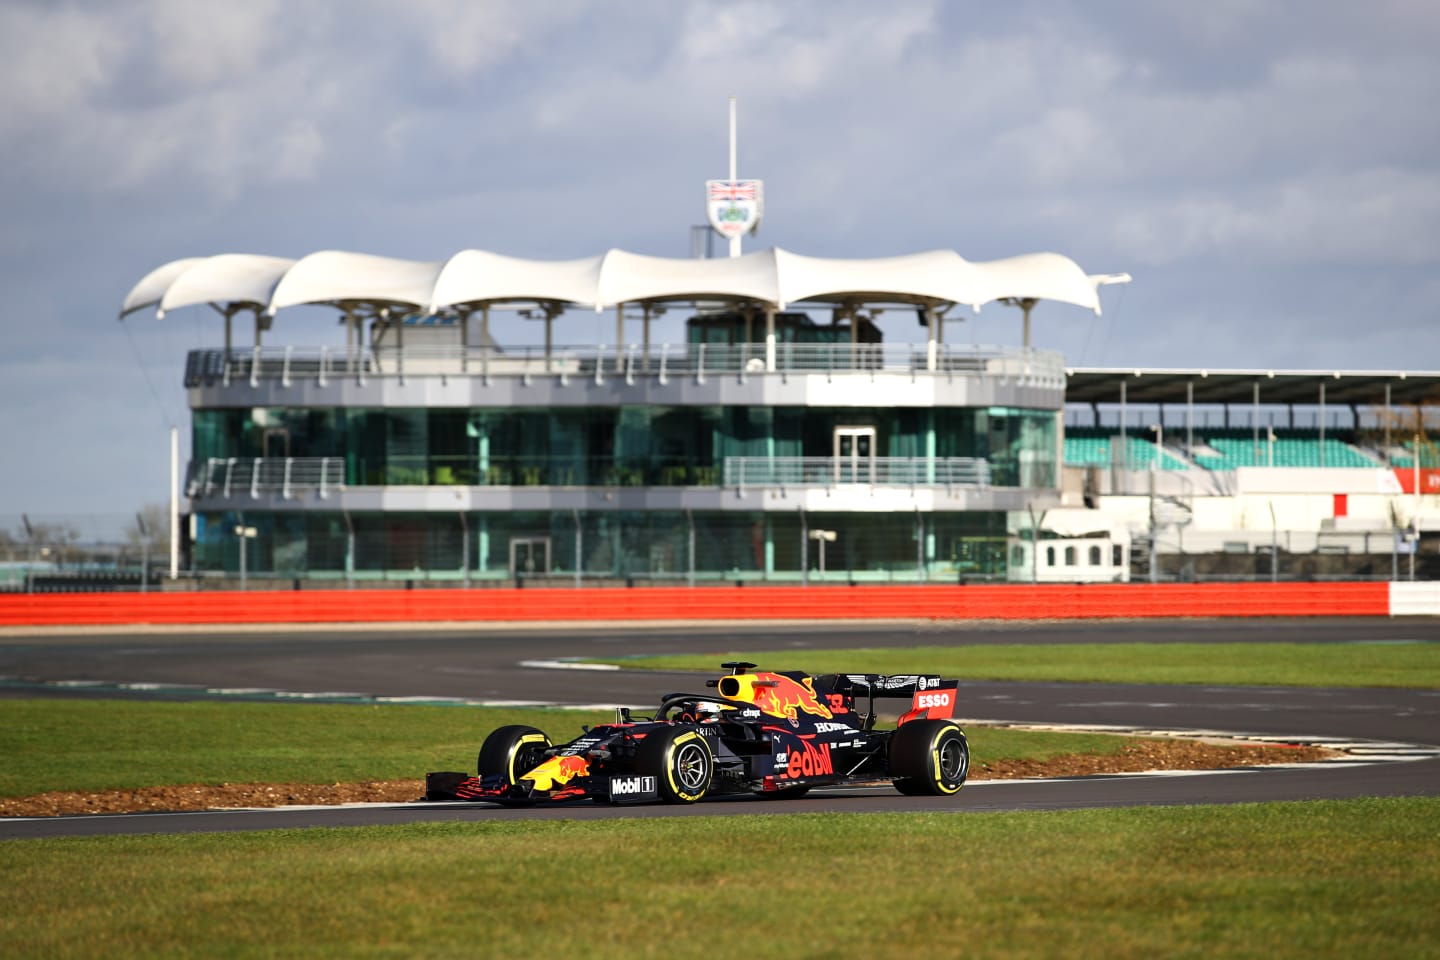 Will the RB16 be a winner for Red Bull in 2020?